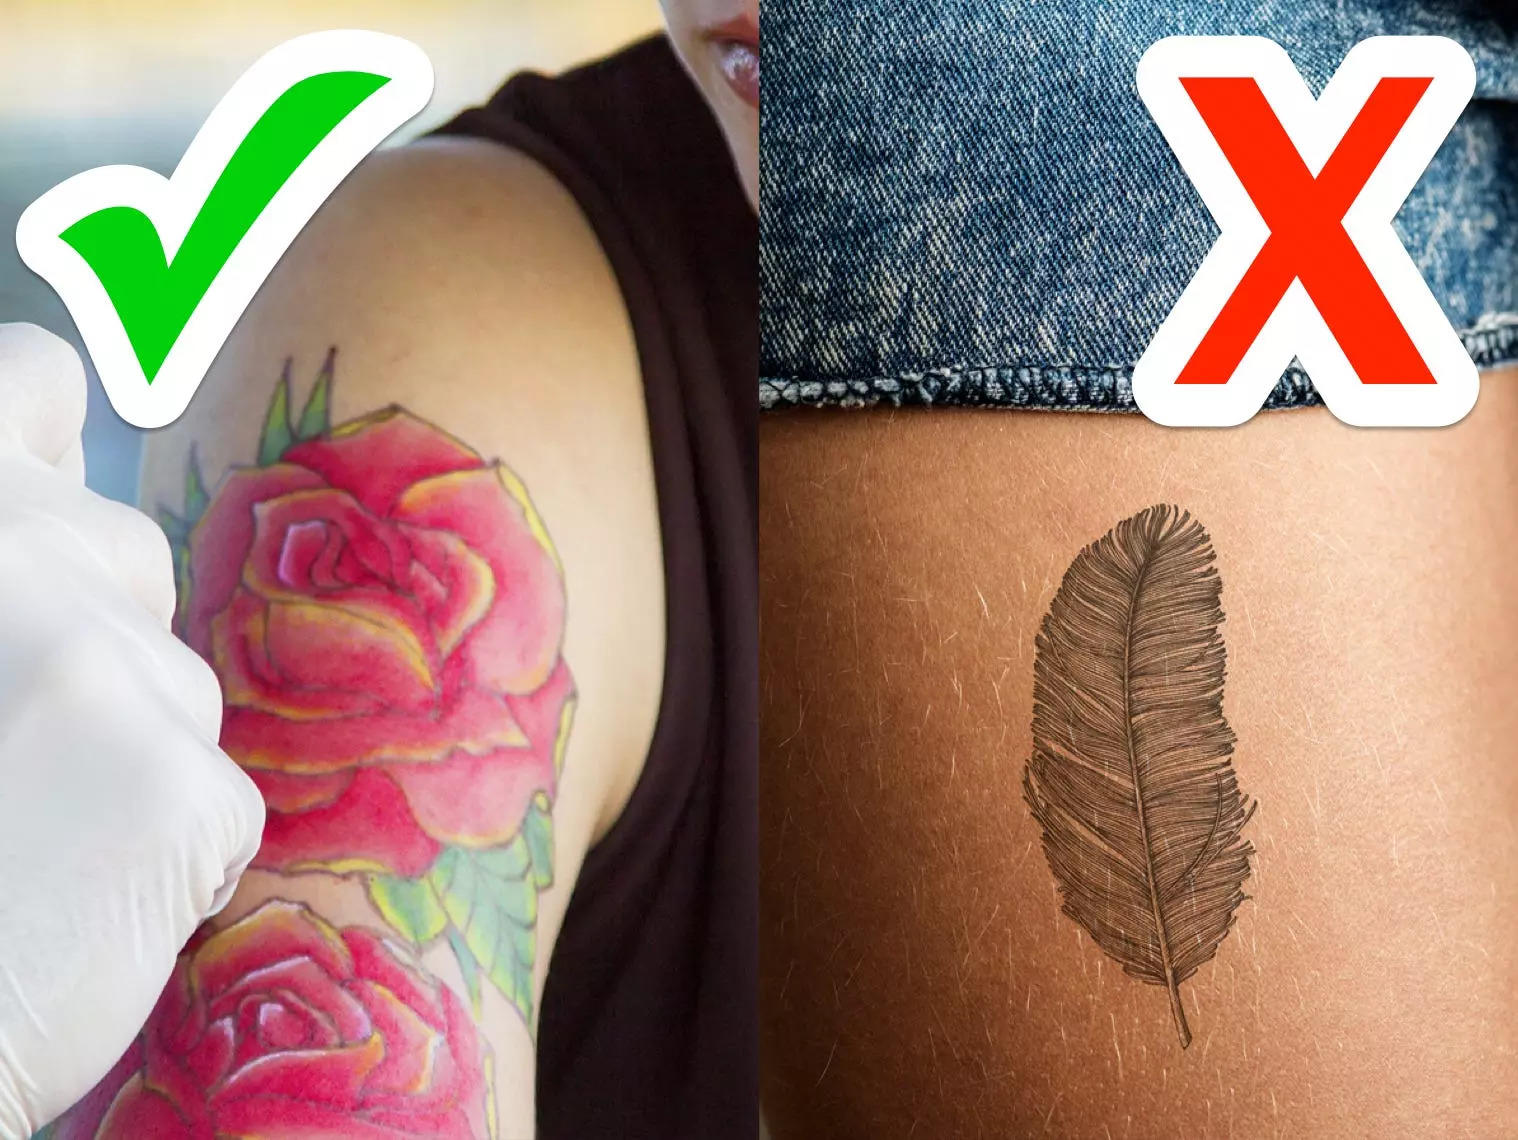 5 Popular Tattoo Designs In Korea, According To A Tattoo Artist | Preview.ph